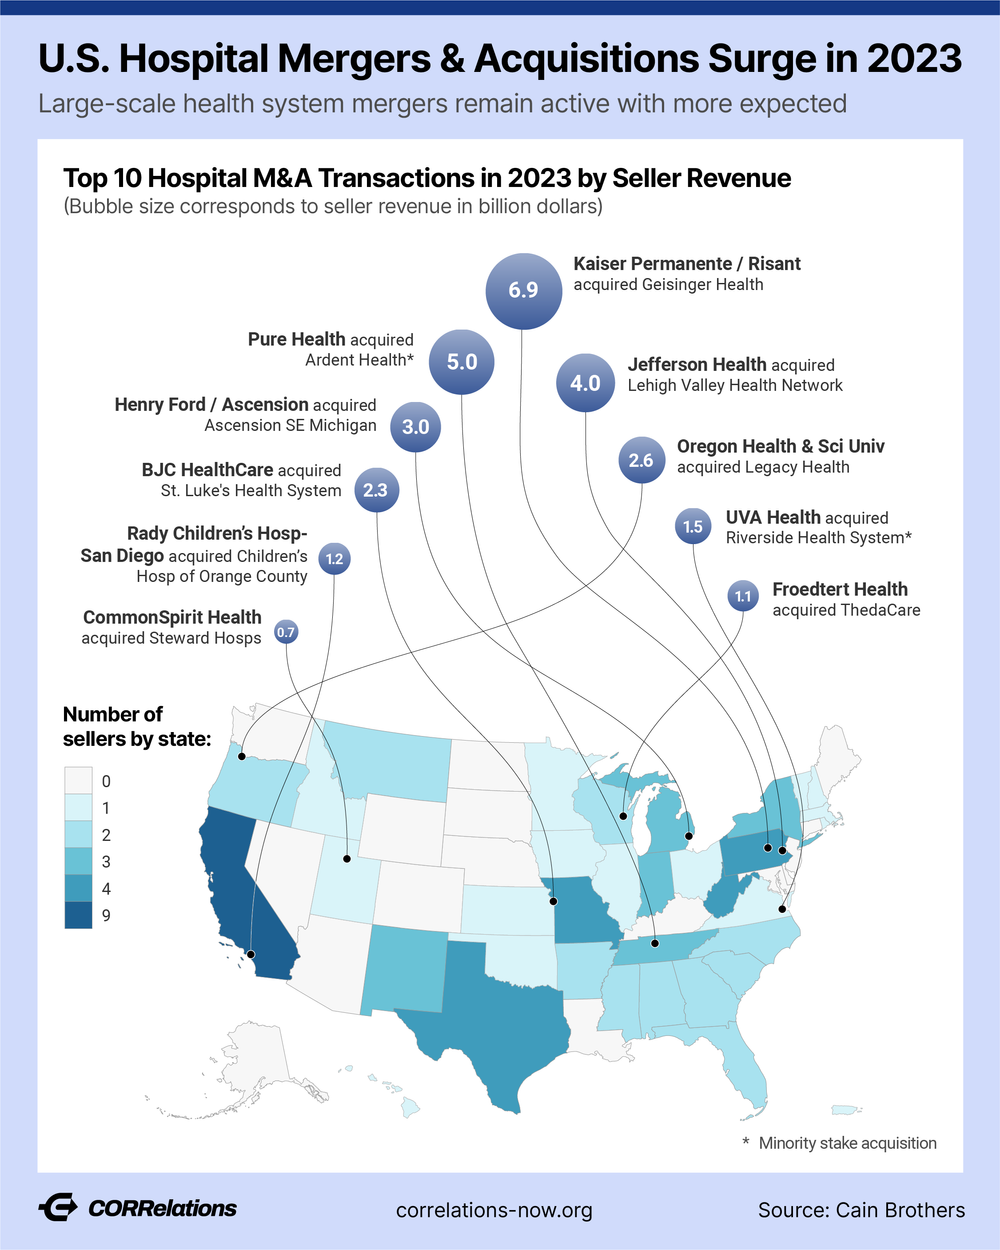 Hospitals Seek to Grow Capabilities and Scale